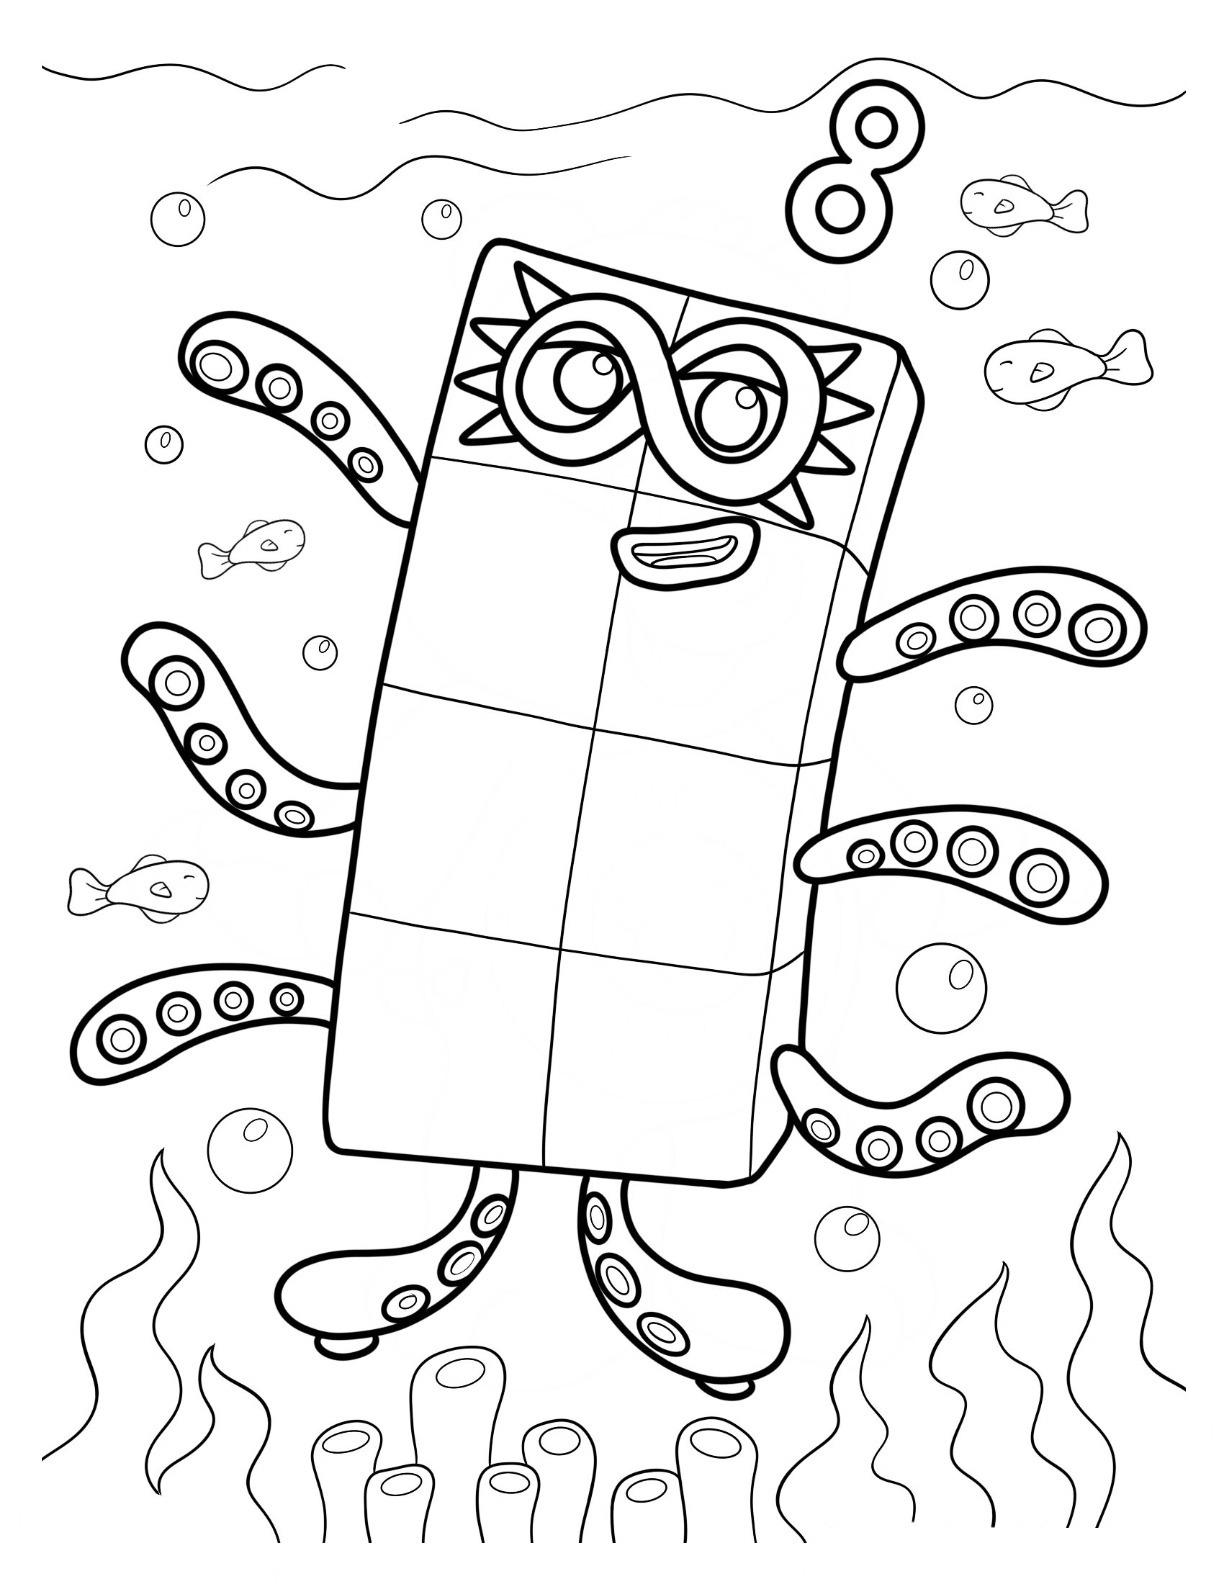 Numberblocks coloring pages by coloringpageswk on